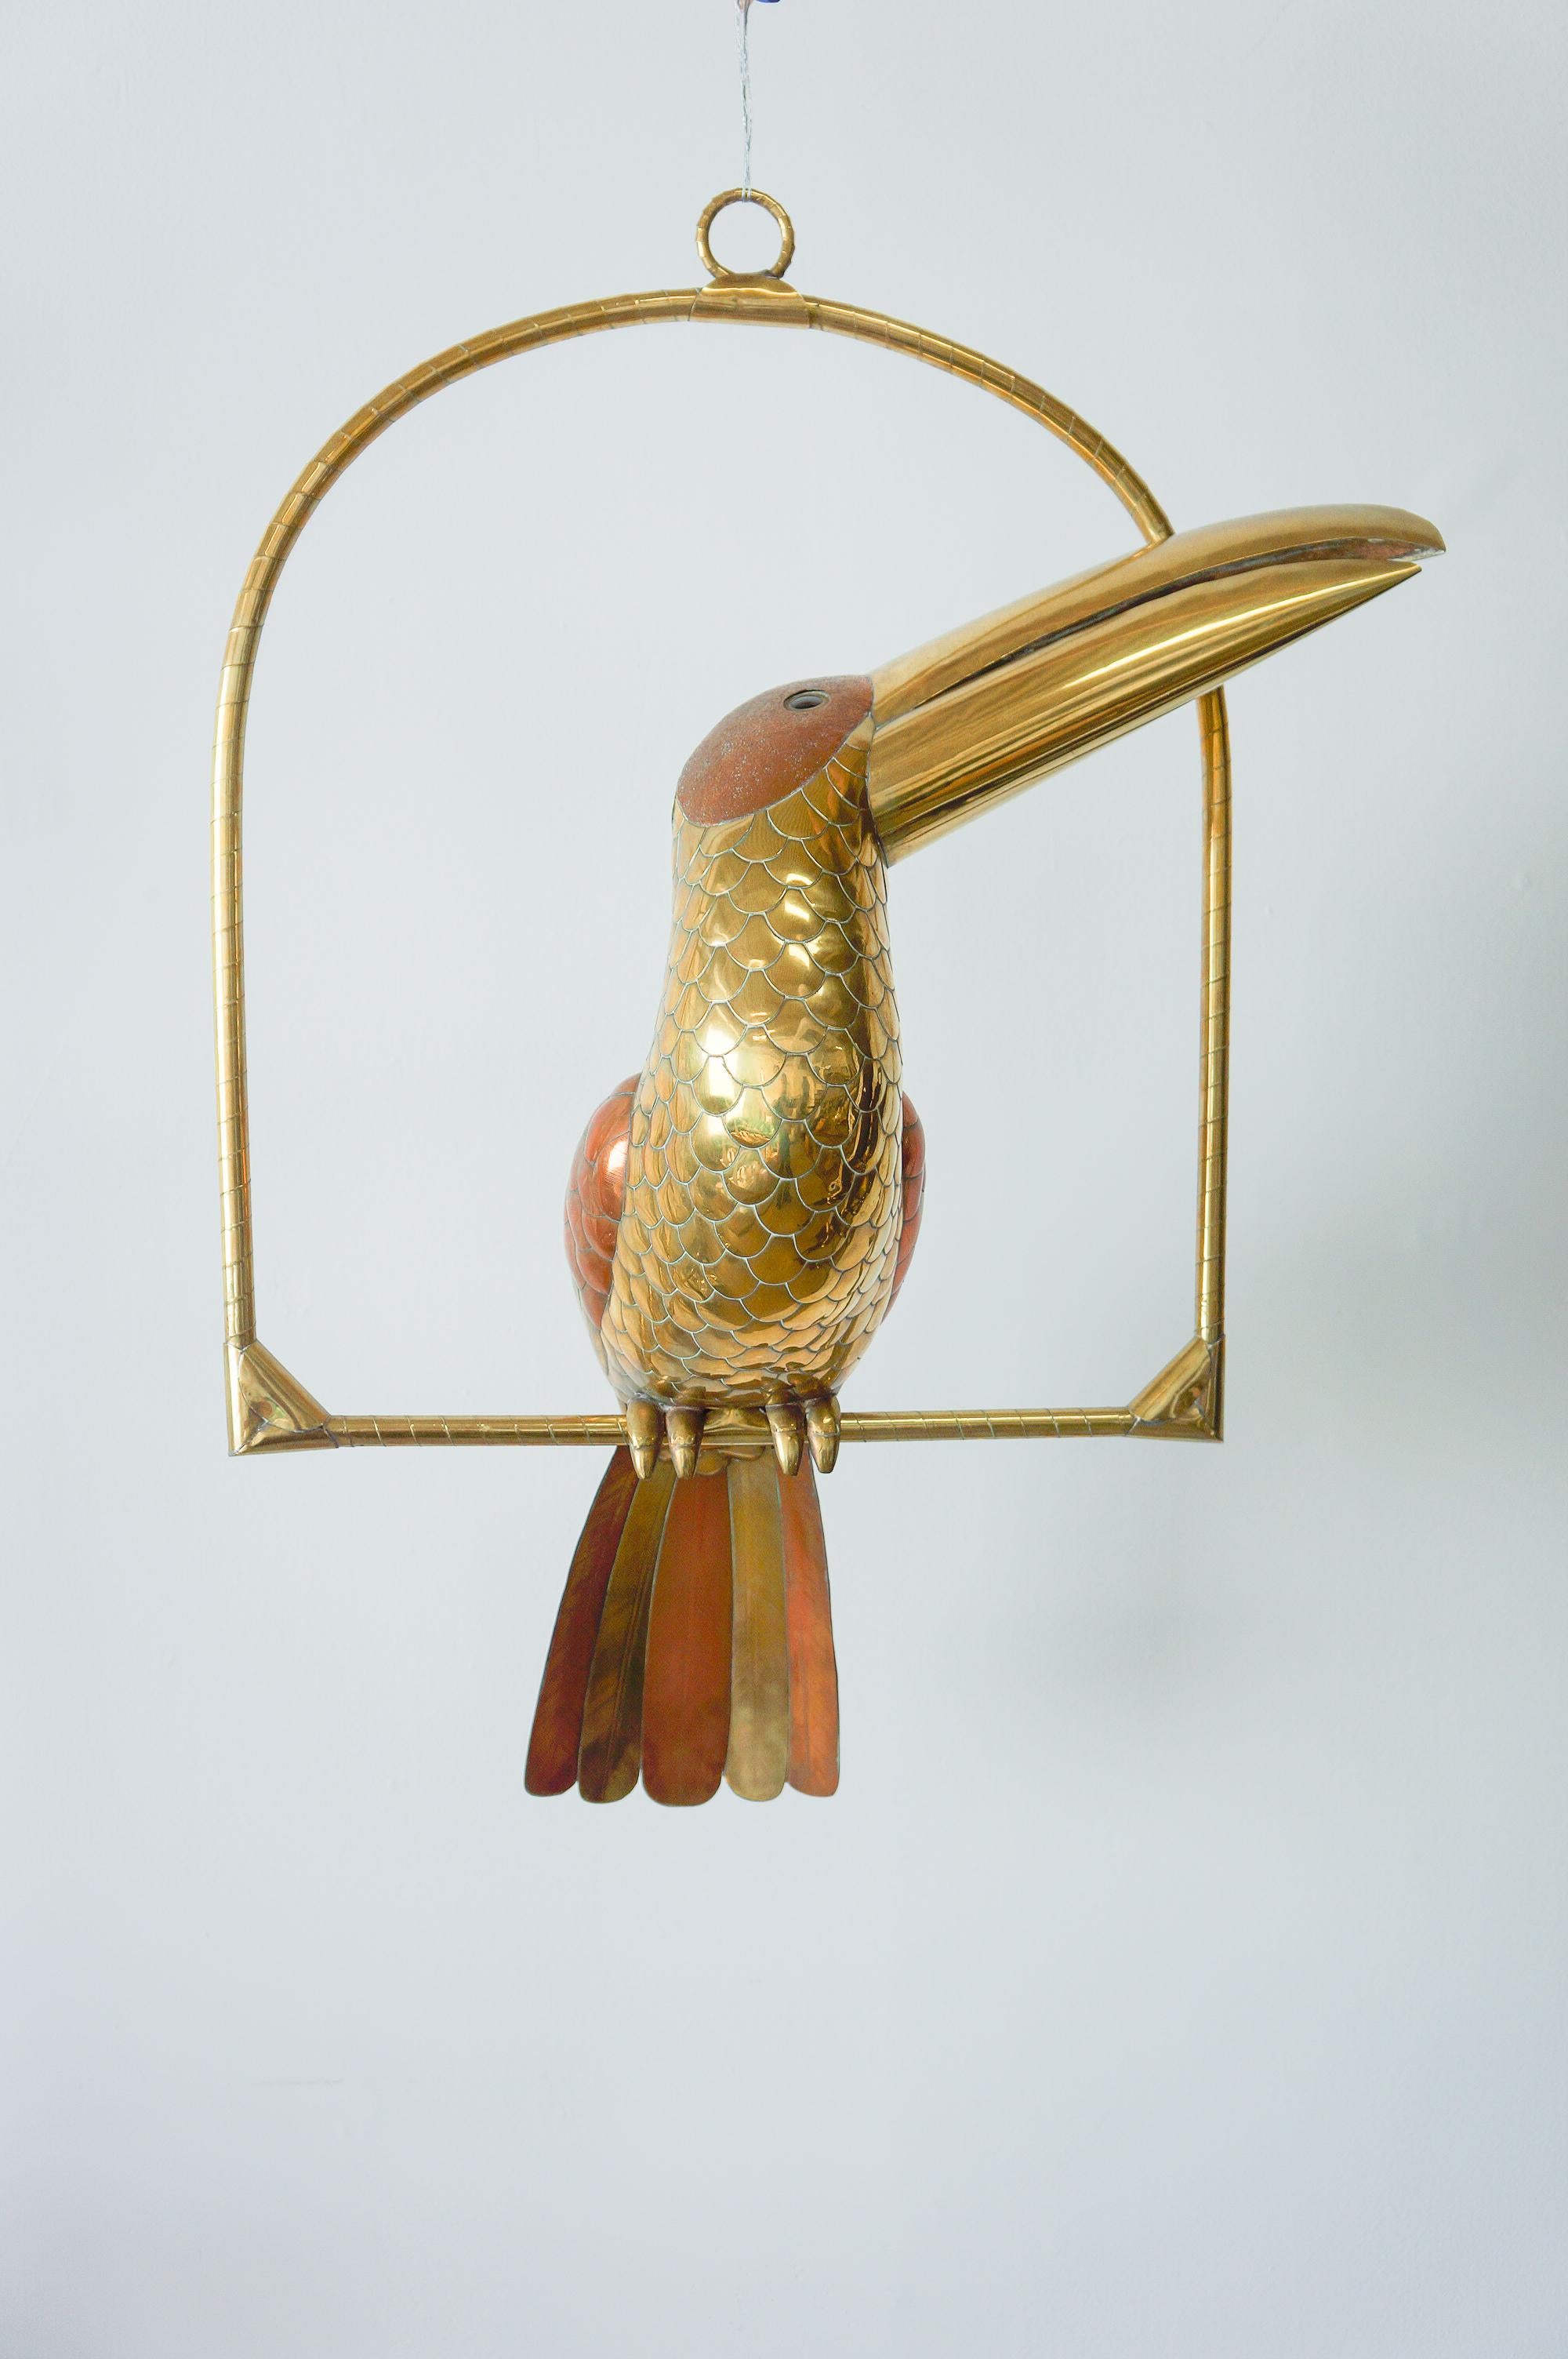 Large, life-sized brass and copper toucan on a hanging perch handmade by Sergio Bustamante. 

The world-renowned Mexican artist started creating unique animal themed metal sculptures in the 1970s. Sergio Bustamante, a luminary in the realm of